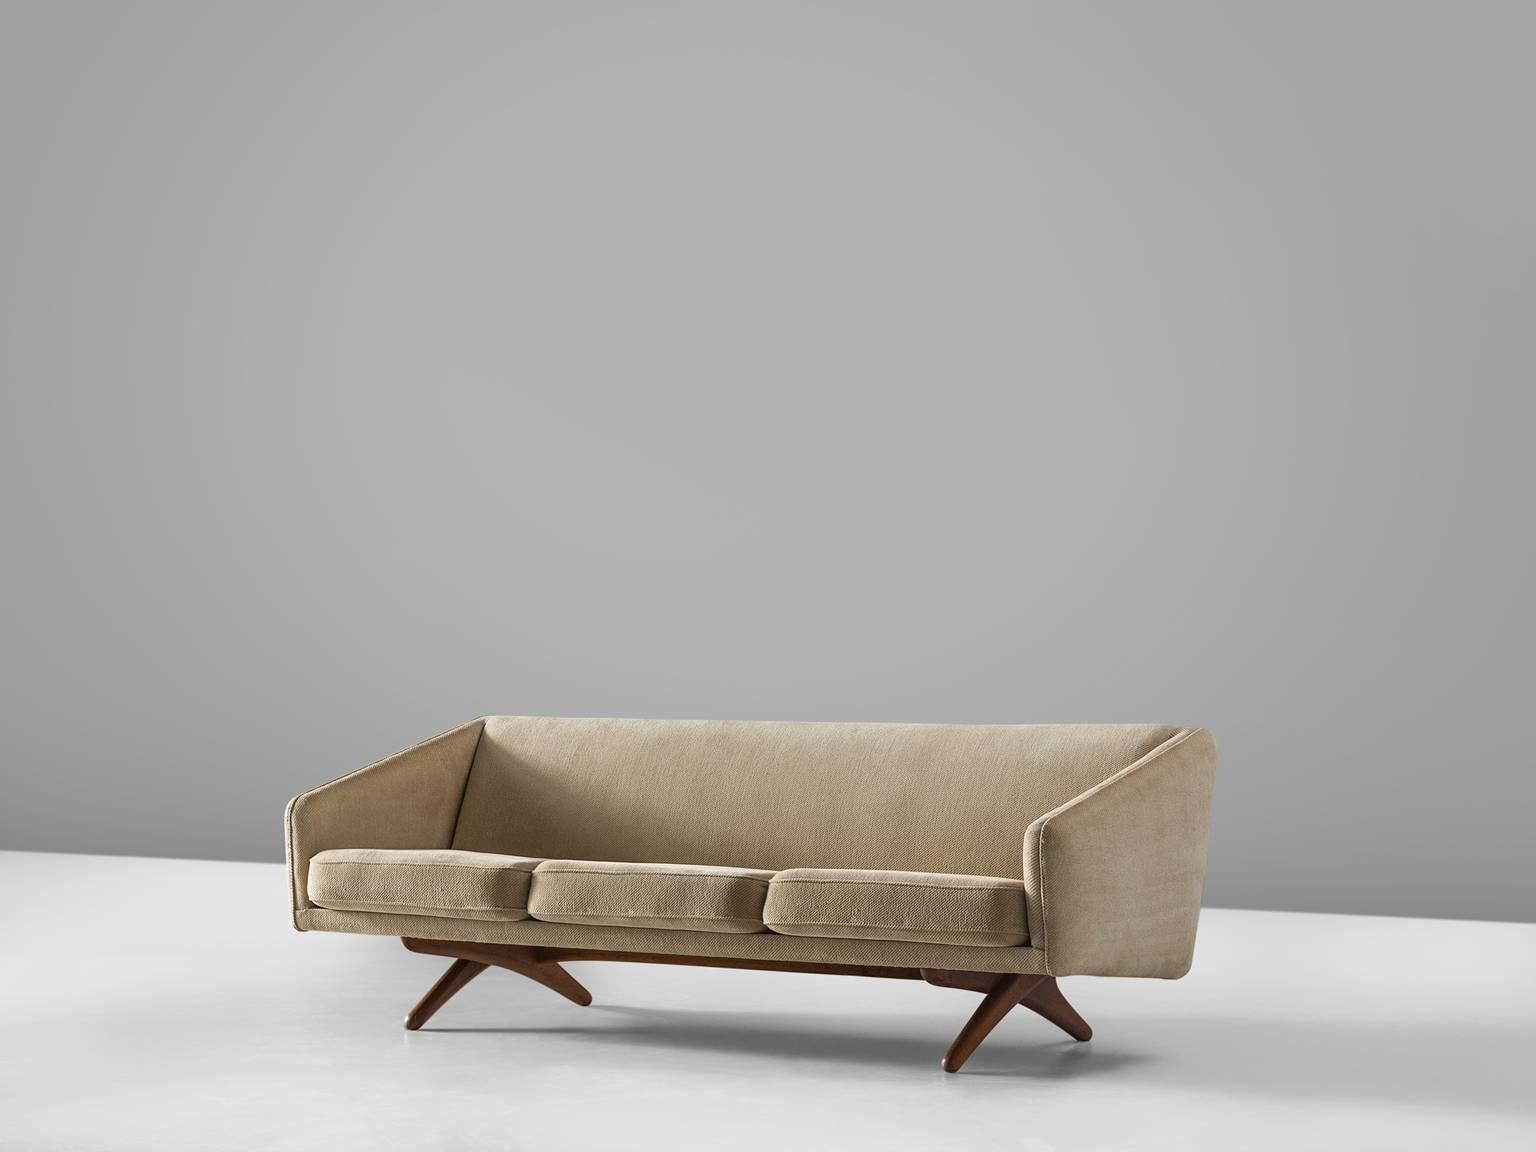 Sofa model ML-90, in beige to grey fabric and oak, by Illum Wikkelsø, Denmark, 1960. 

Modern sofa by Danish designer Illum Wikkelsø in superb thick and corduroy fabric. This beautiful sofa has a playful and simplified design. The seating is